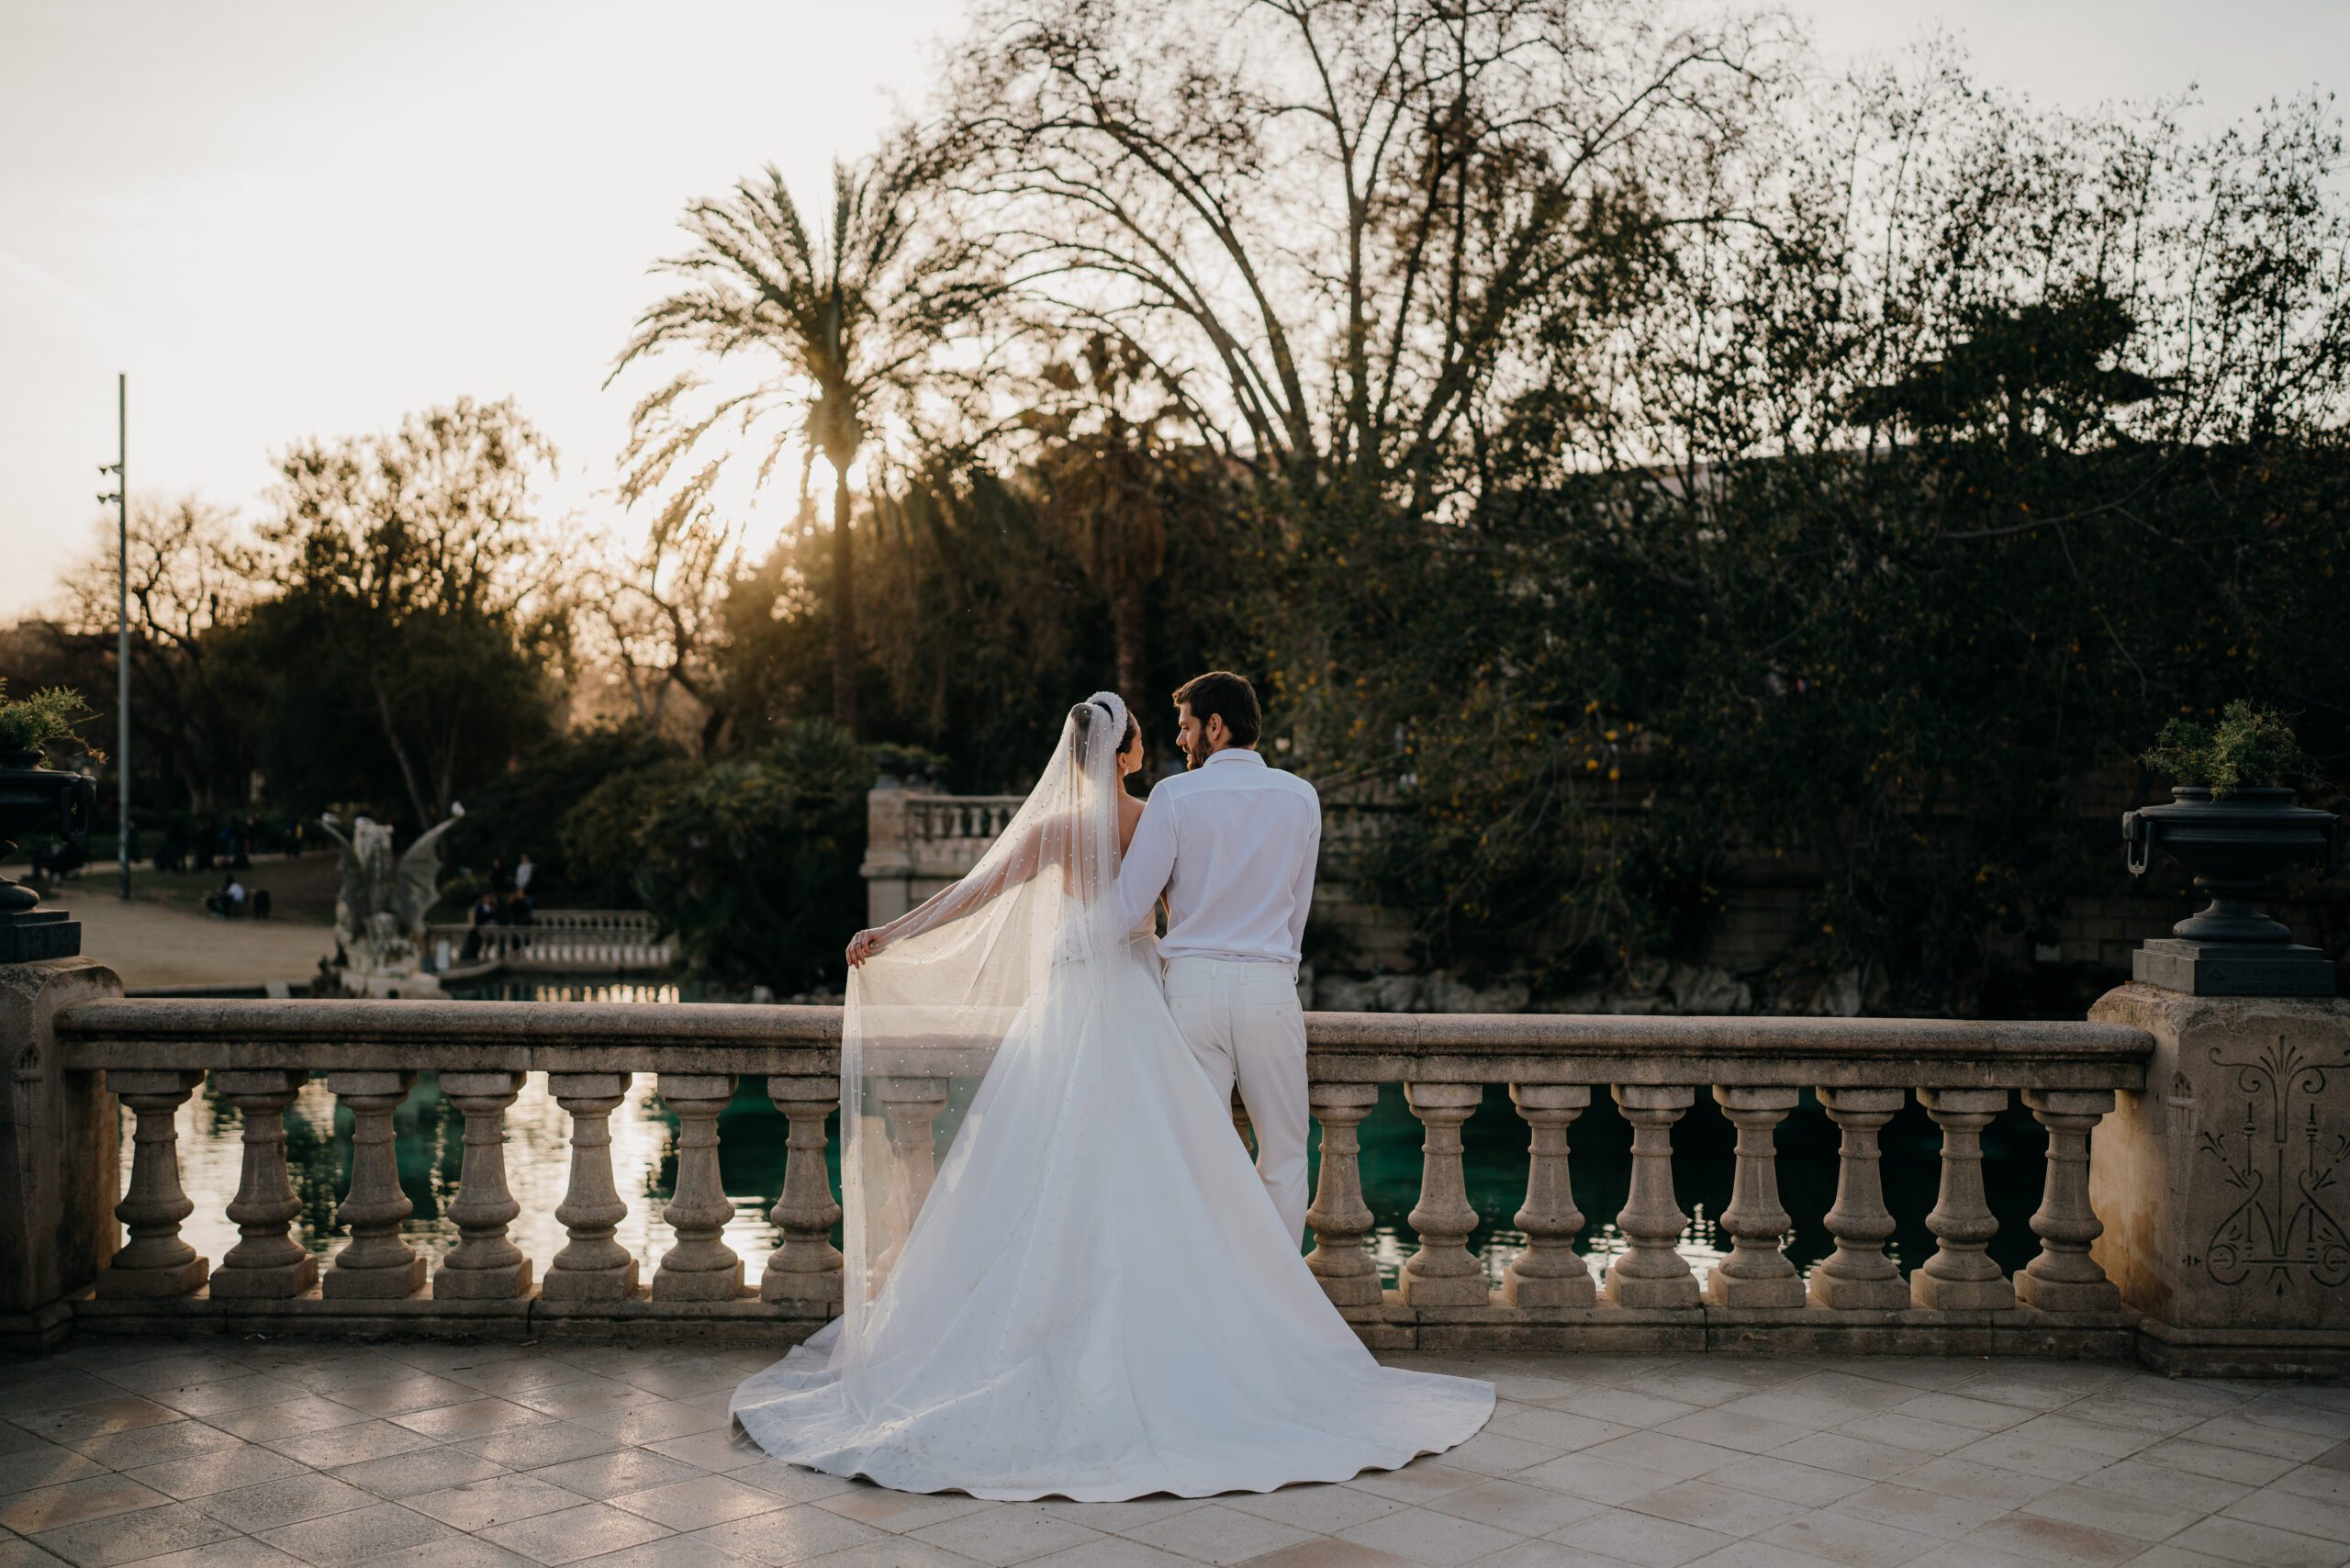 Newly weds at golden hour on the steps of ciutedella park in Barcelona